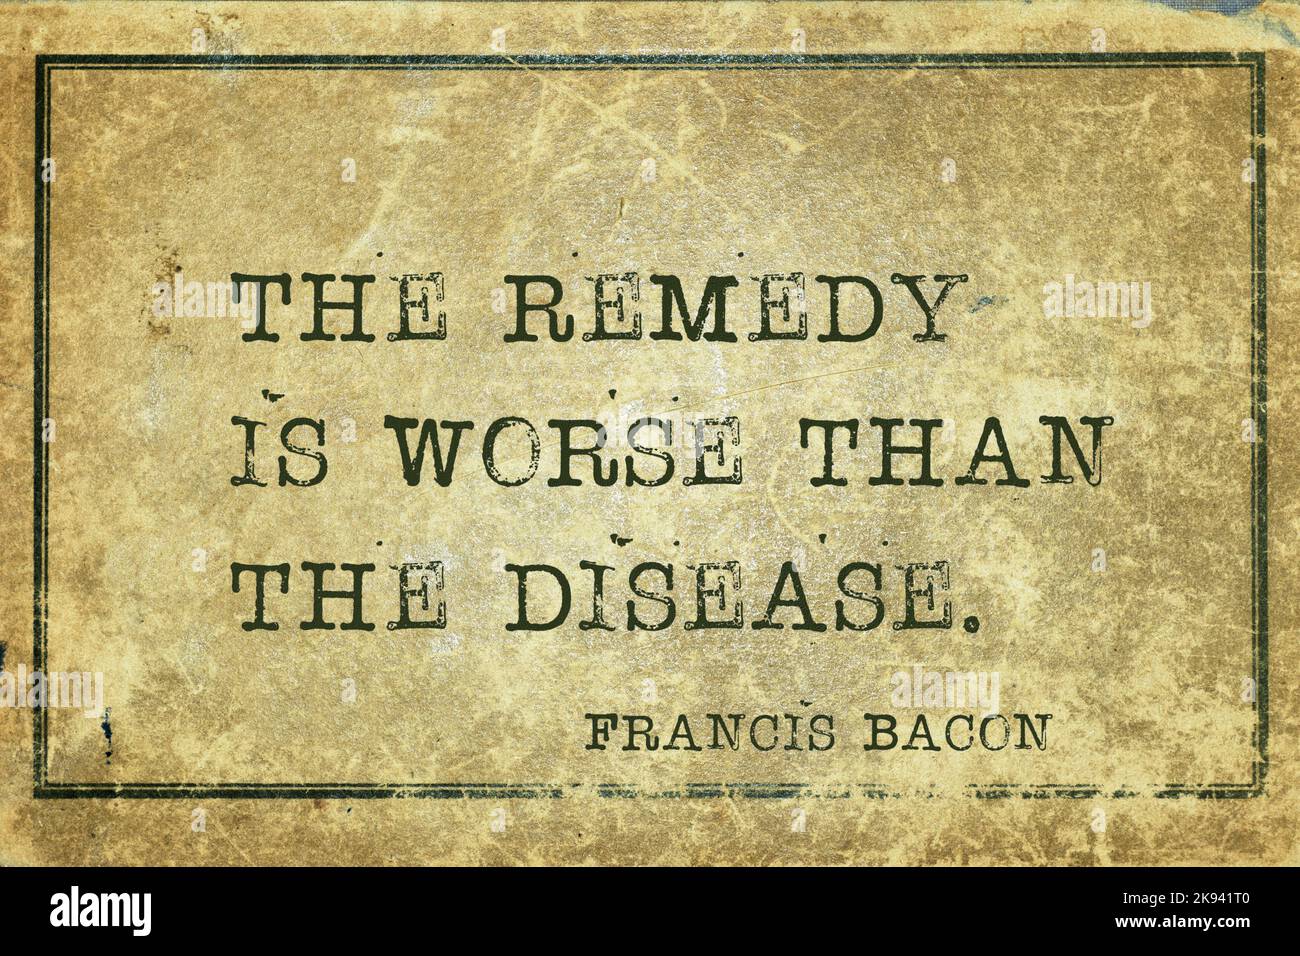 The remedy is worse than the disease - famous medieval English philosopher Francis Bacon quote printed on grunge vintage cardboard Stock Photo